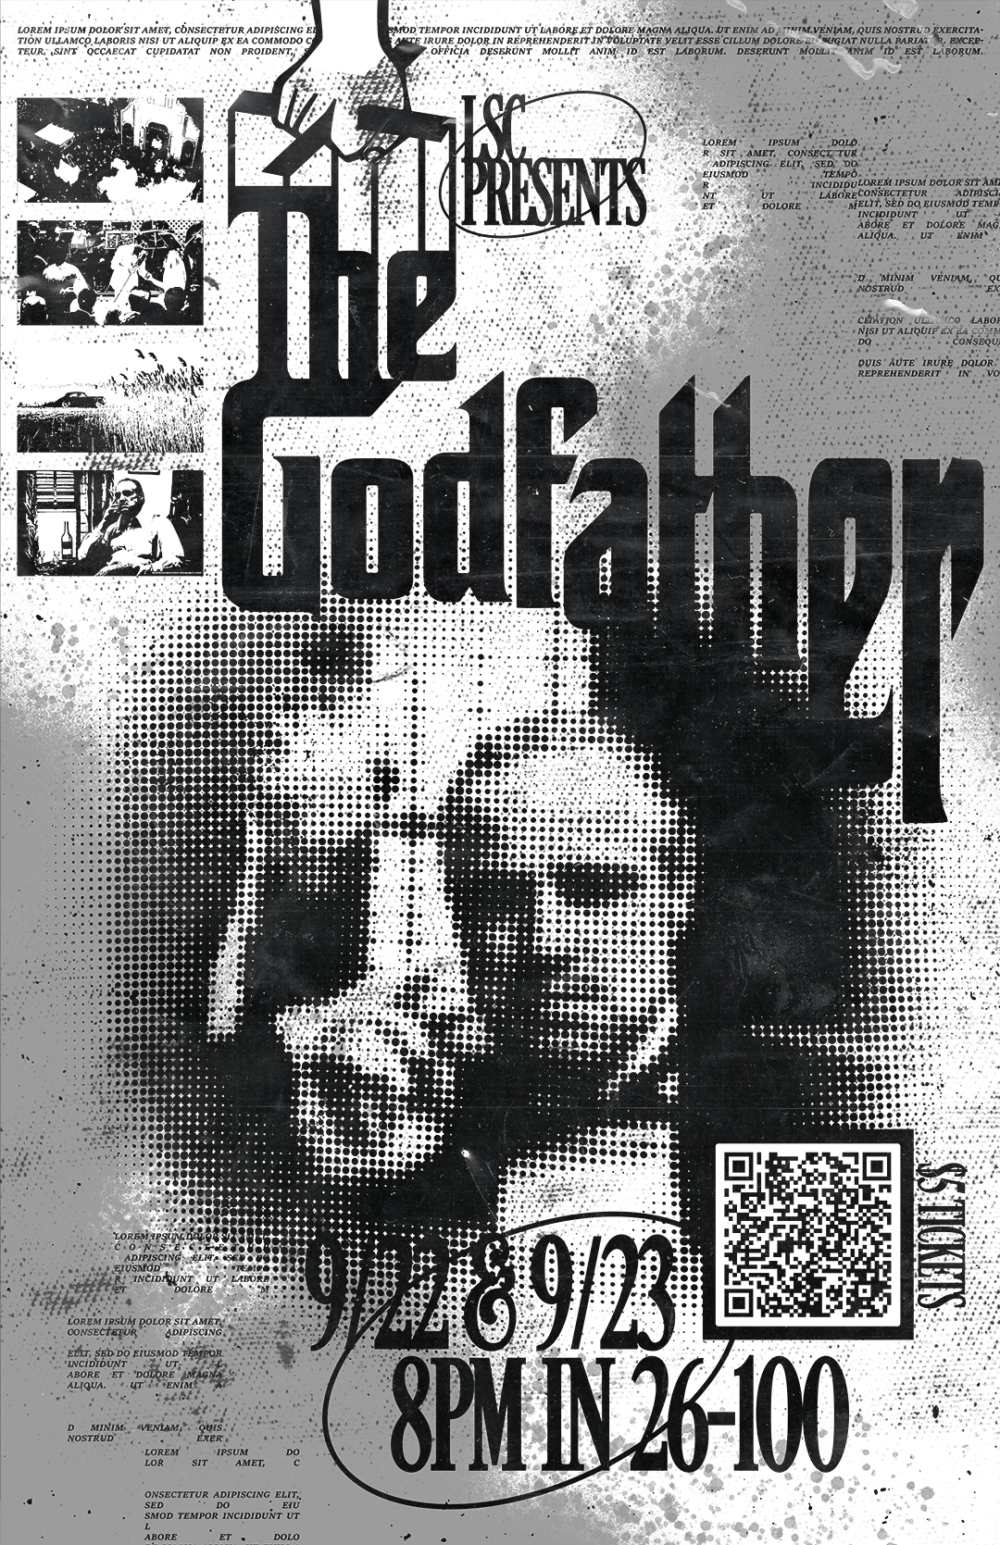 a poster for the movie "The Godfather", featuring an image of a character in the movie and text with the movie's title and other event details